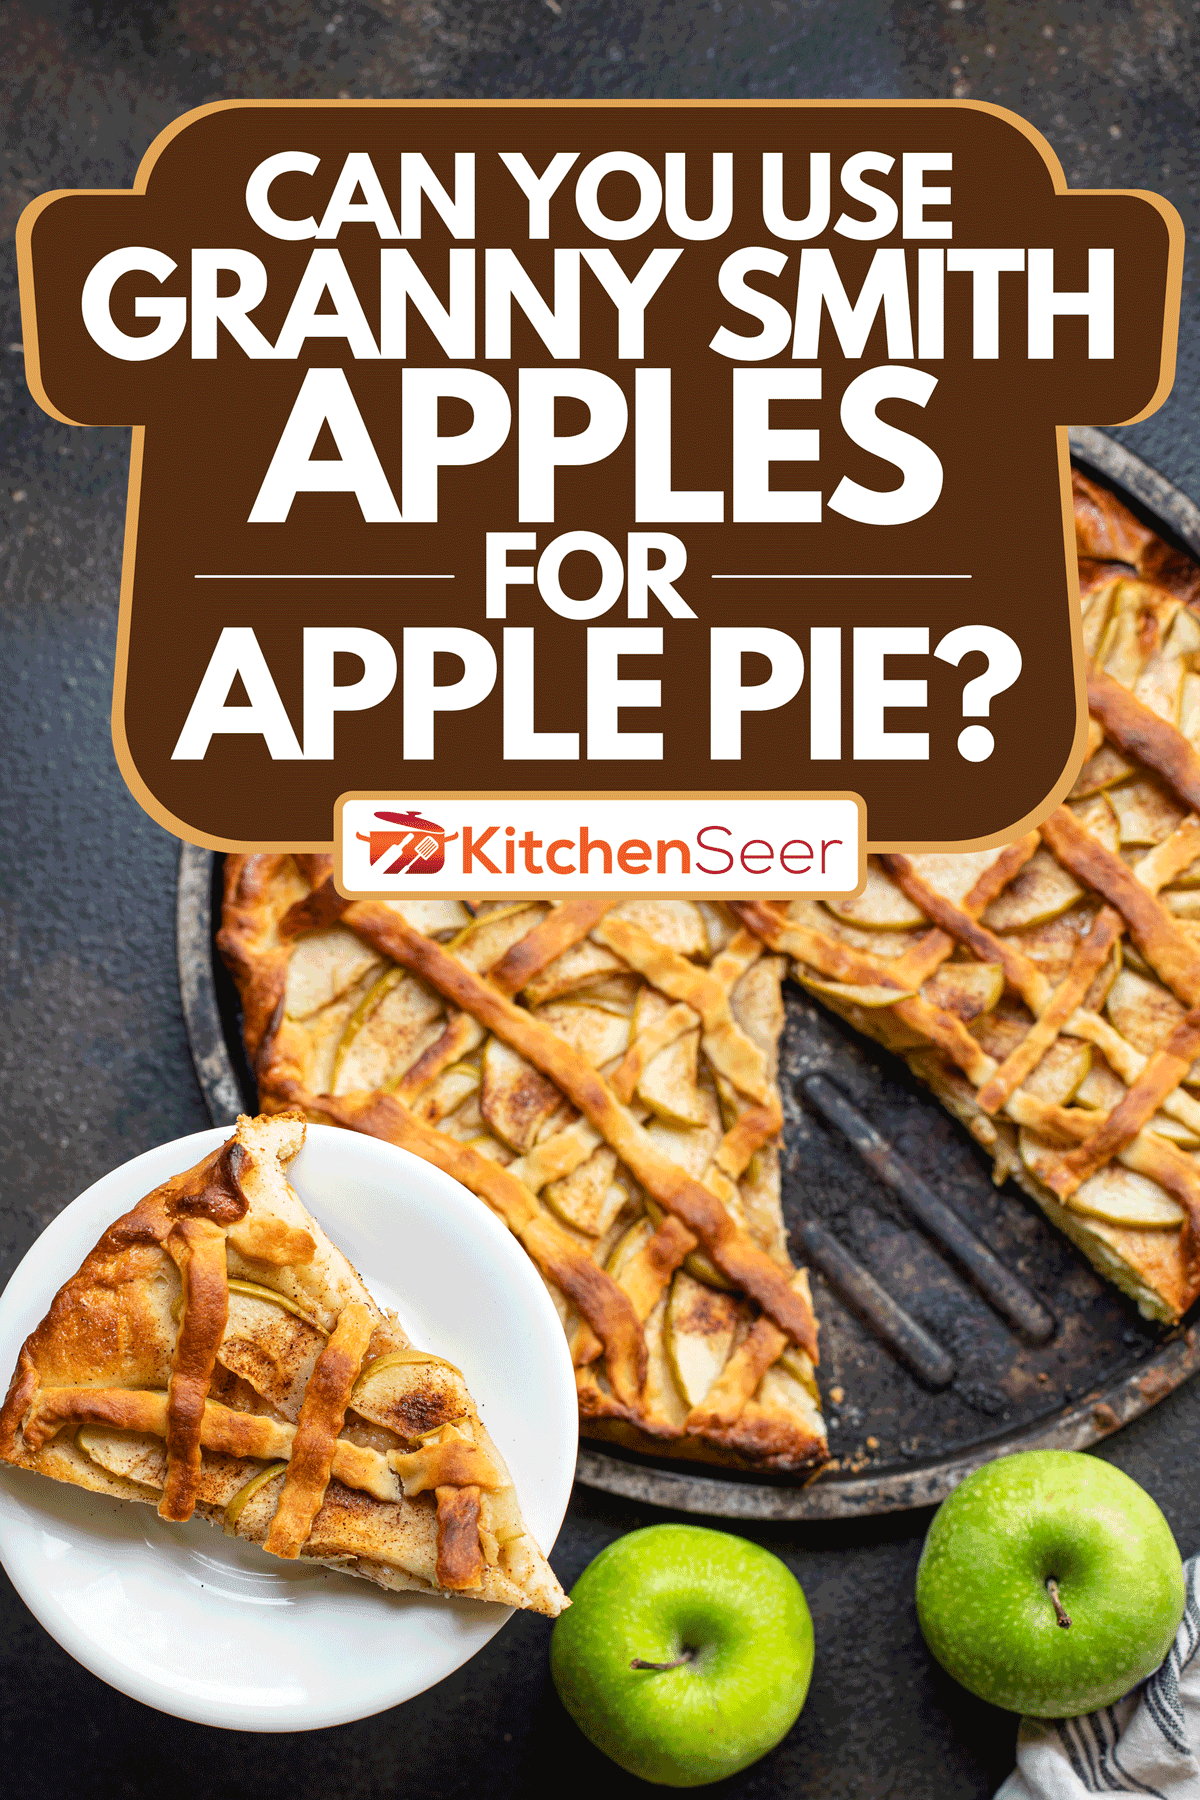 Slice of apple pie dessert on a plate, Can You Use Granny Smith Apples For Apple Pie?